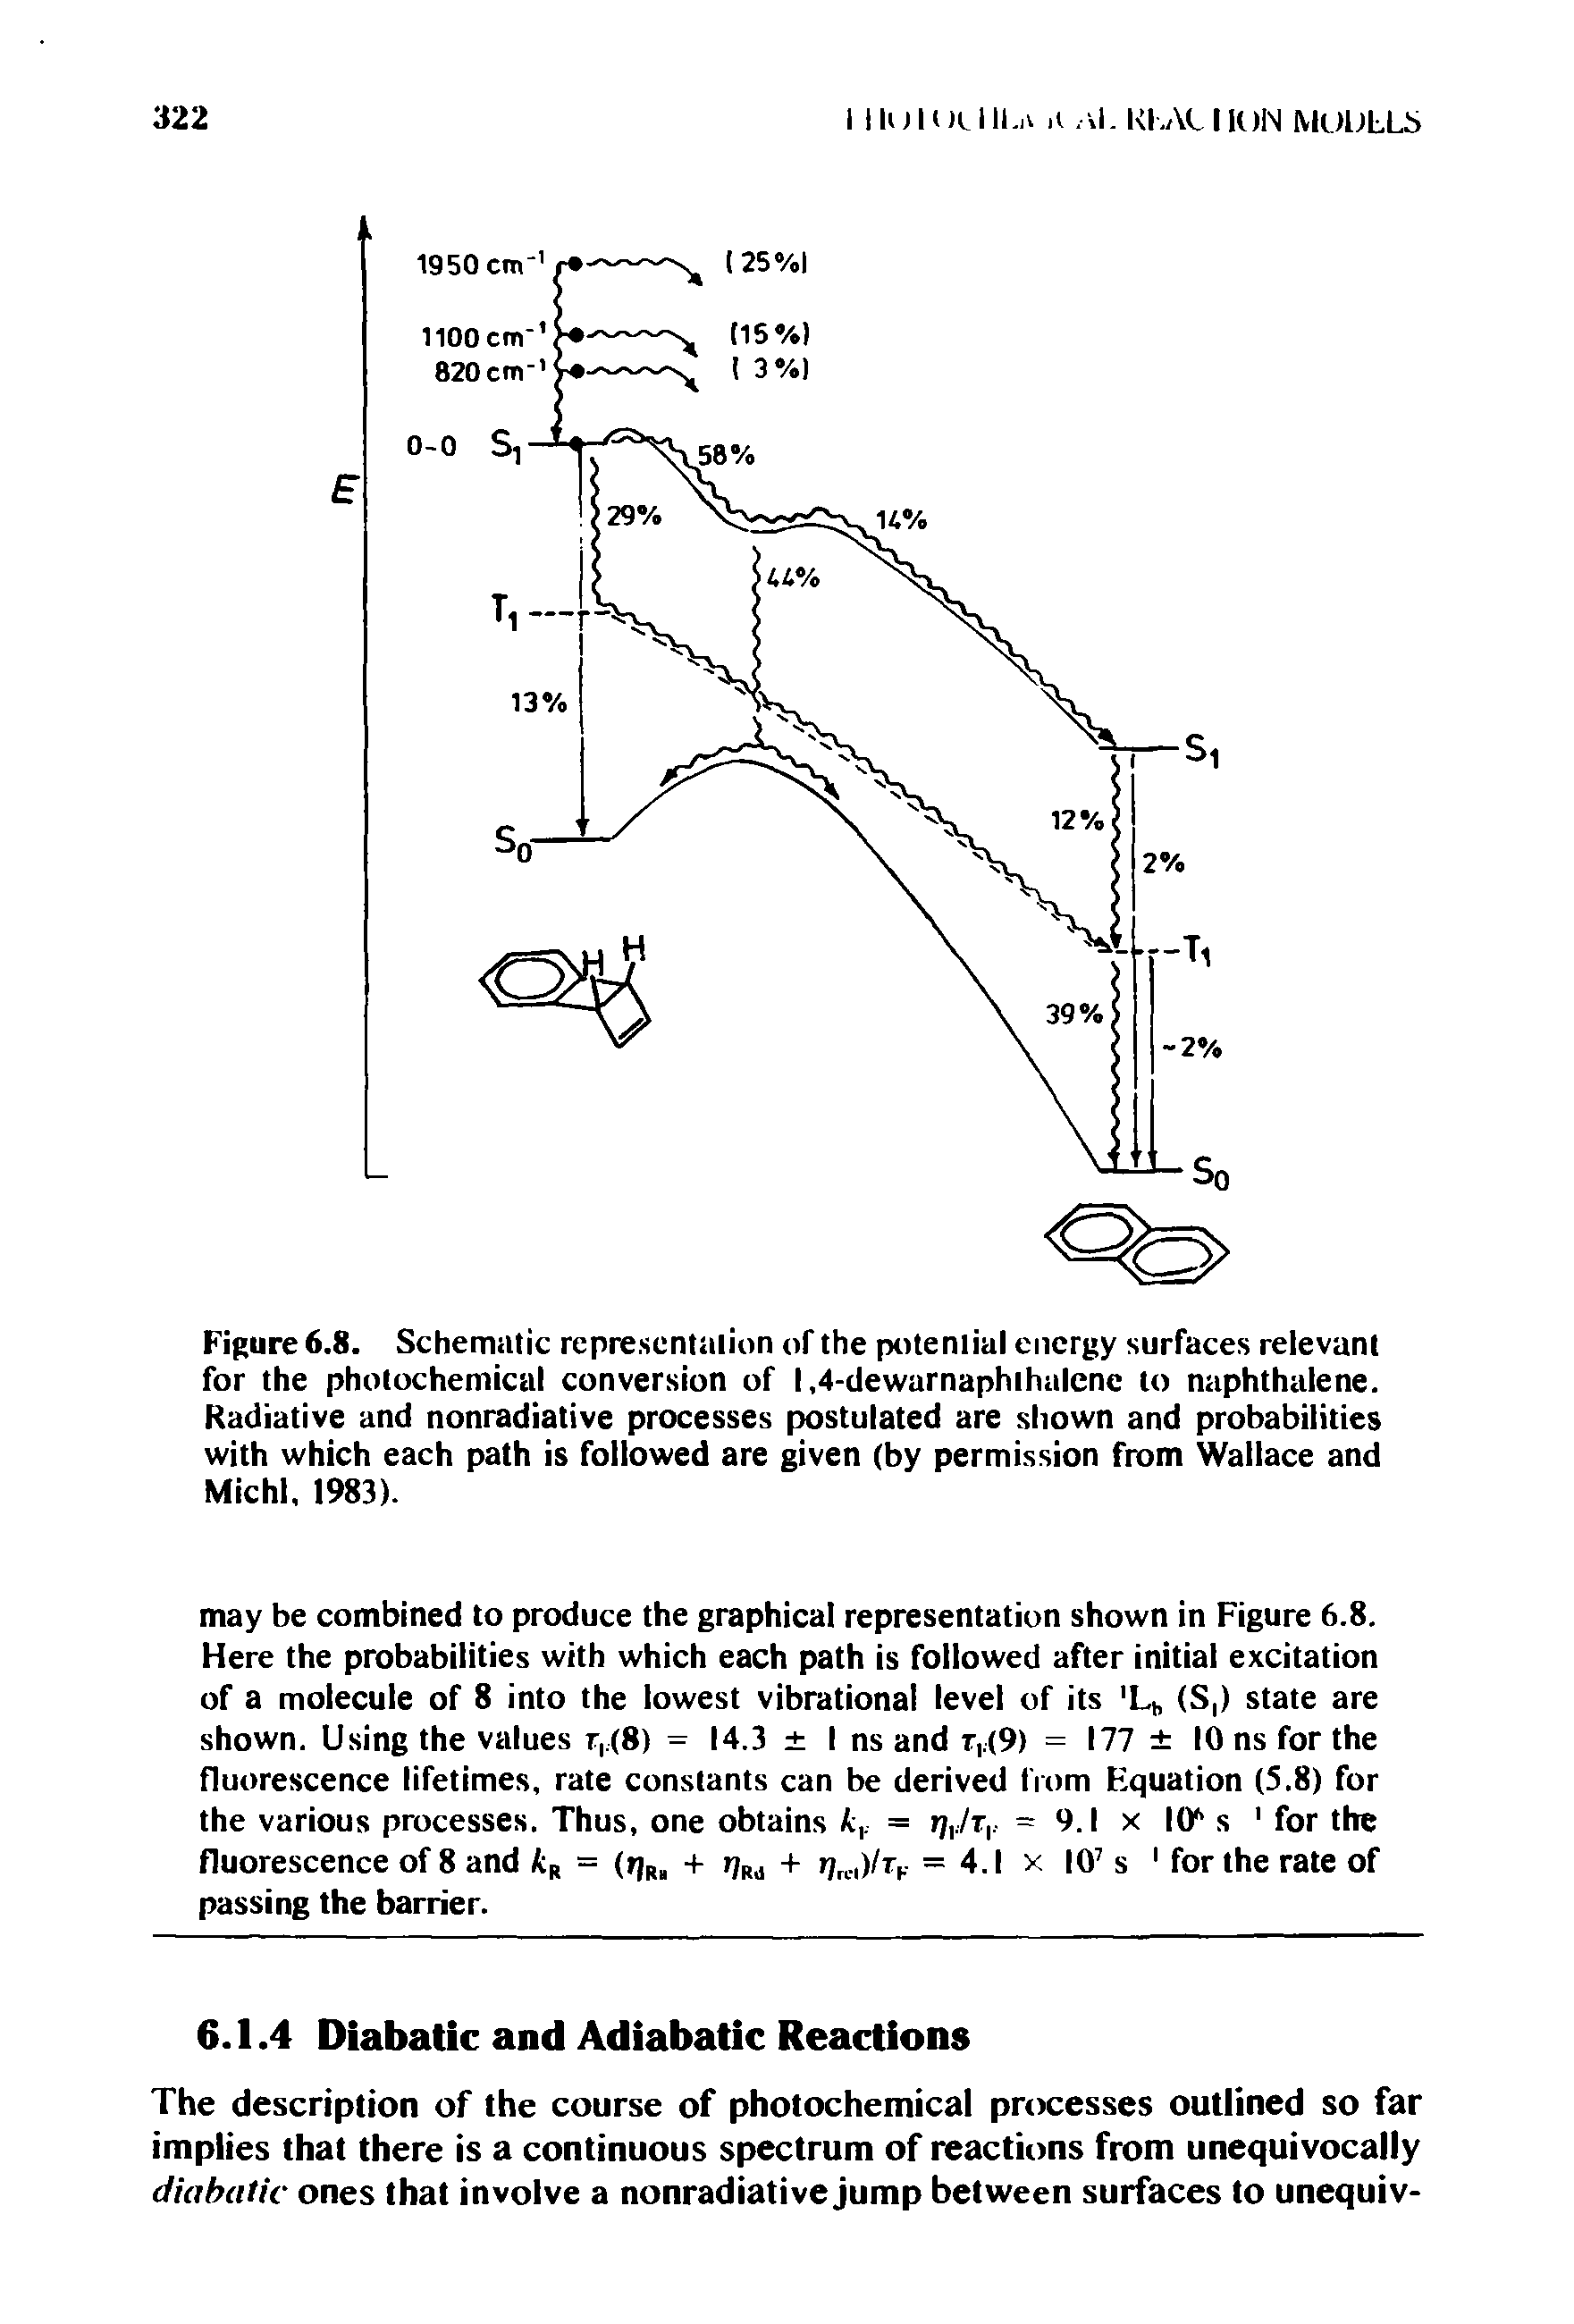 Figure 6.8. Schematic representation of the potential energy surfaces relevant for the photochemical conversion of 1,4-dewarnaphihalcnc to naphthalene. Radiative and nonradiative processes postulated are shown and probabilities with which each path is followed are given (by permission from Wallace and Michl, 1983).